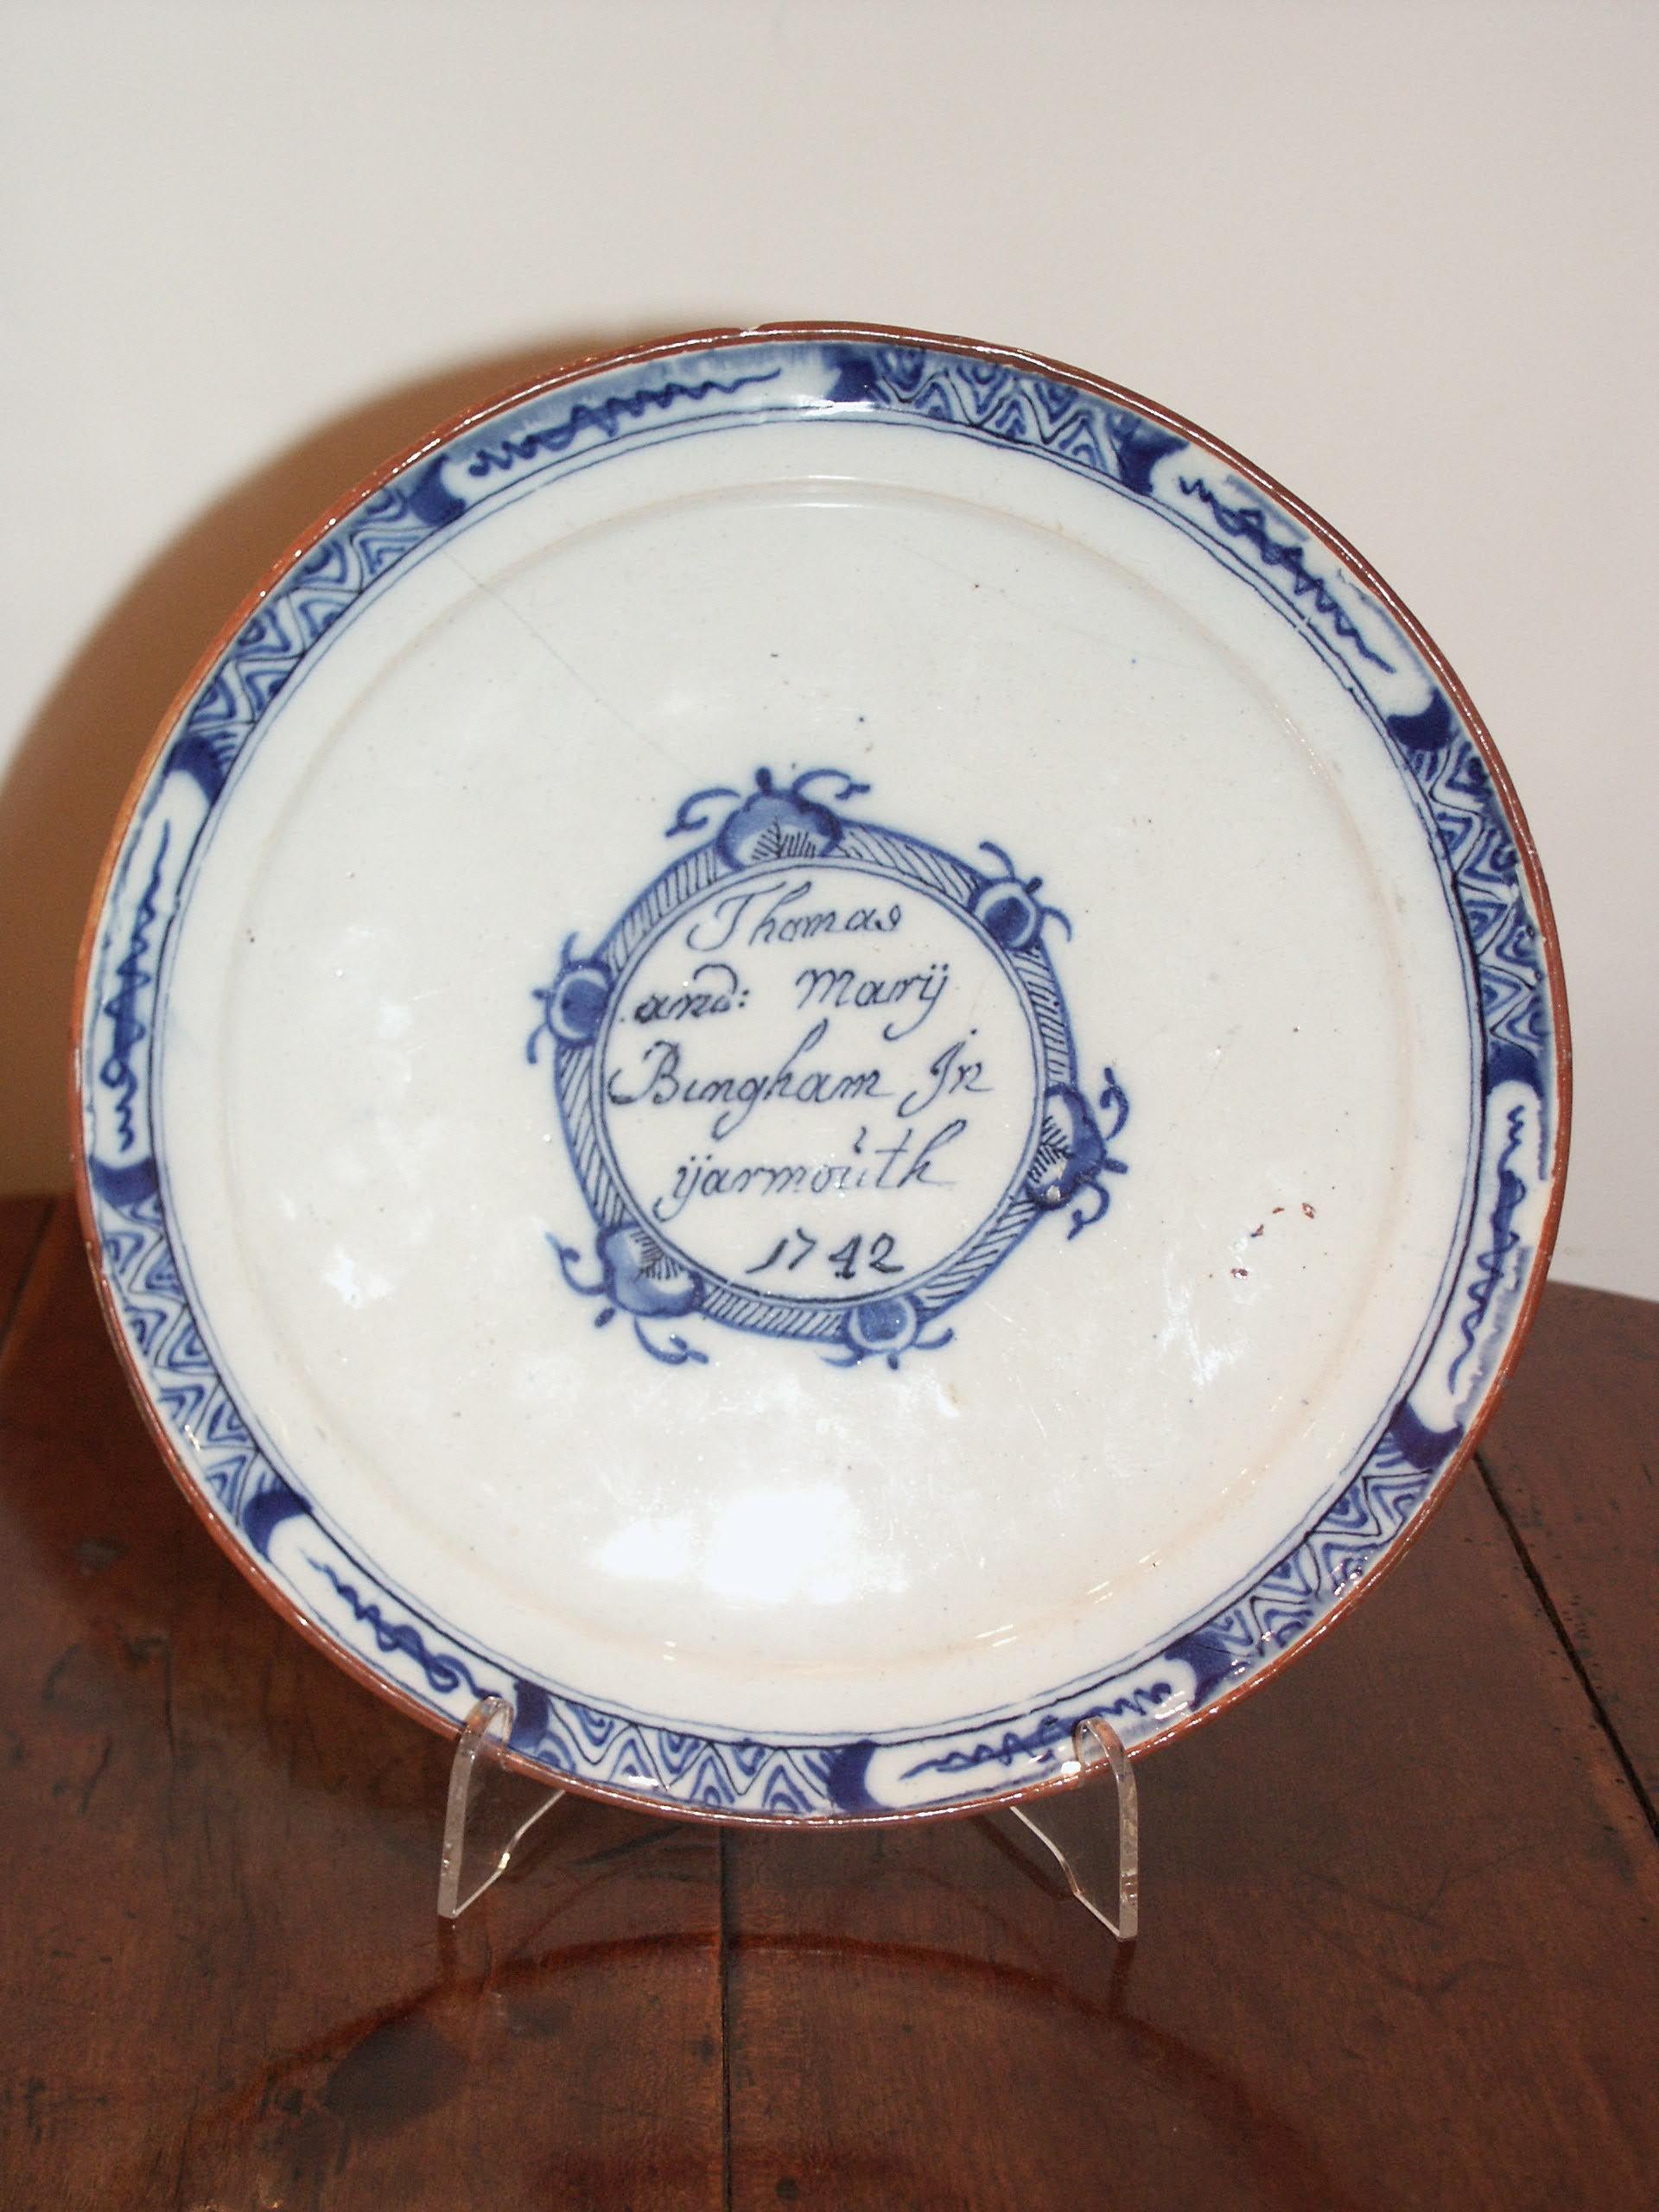 Baroque Plate Delftware, Inscribed 1744, Dutch, Great Yarmouth, Blue and White, Herring For Sale